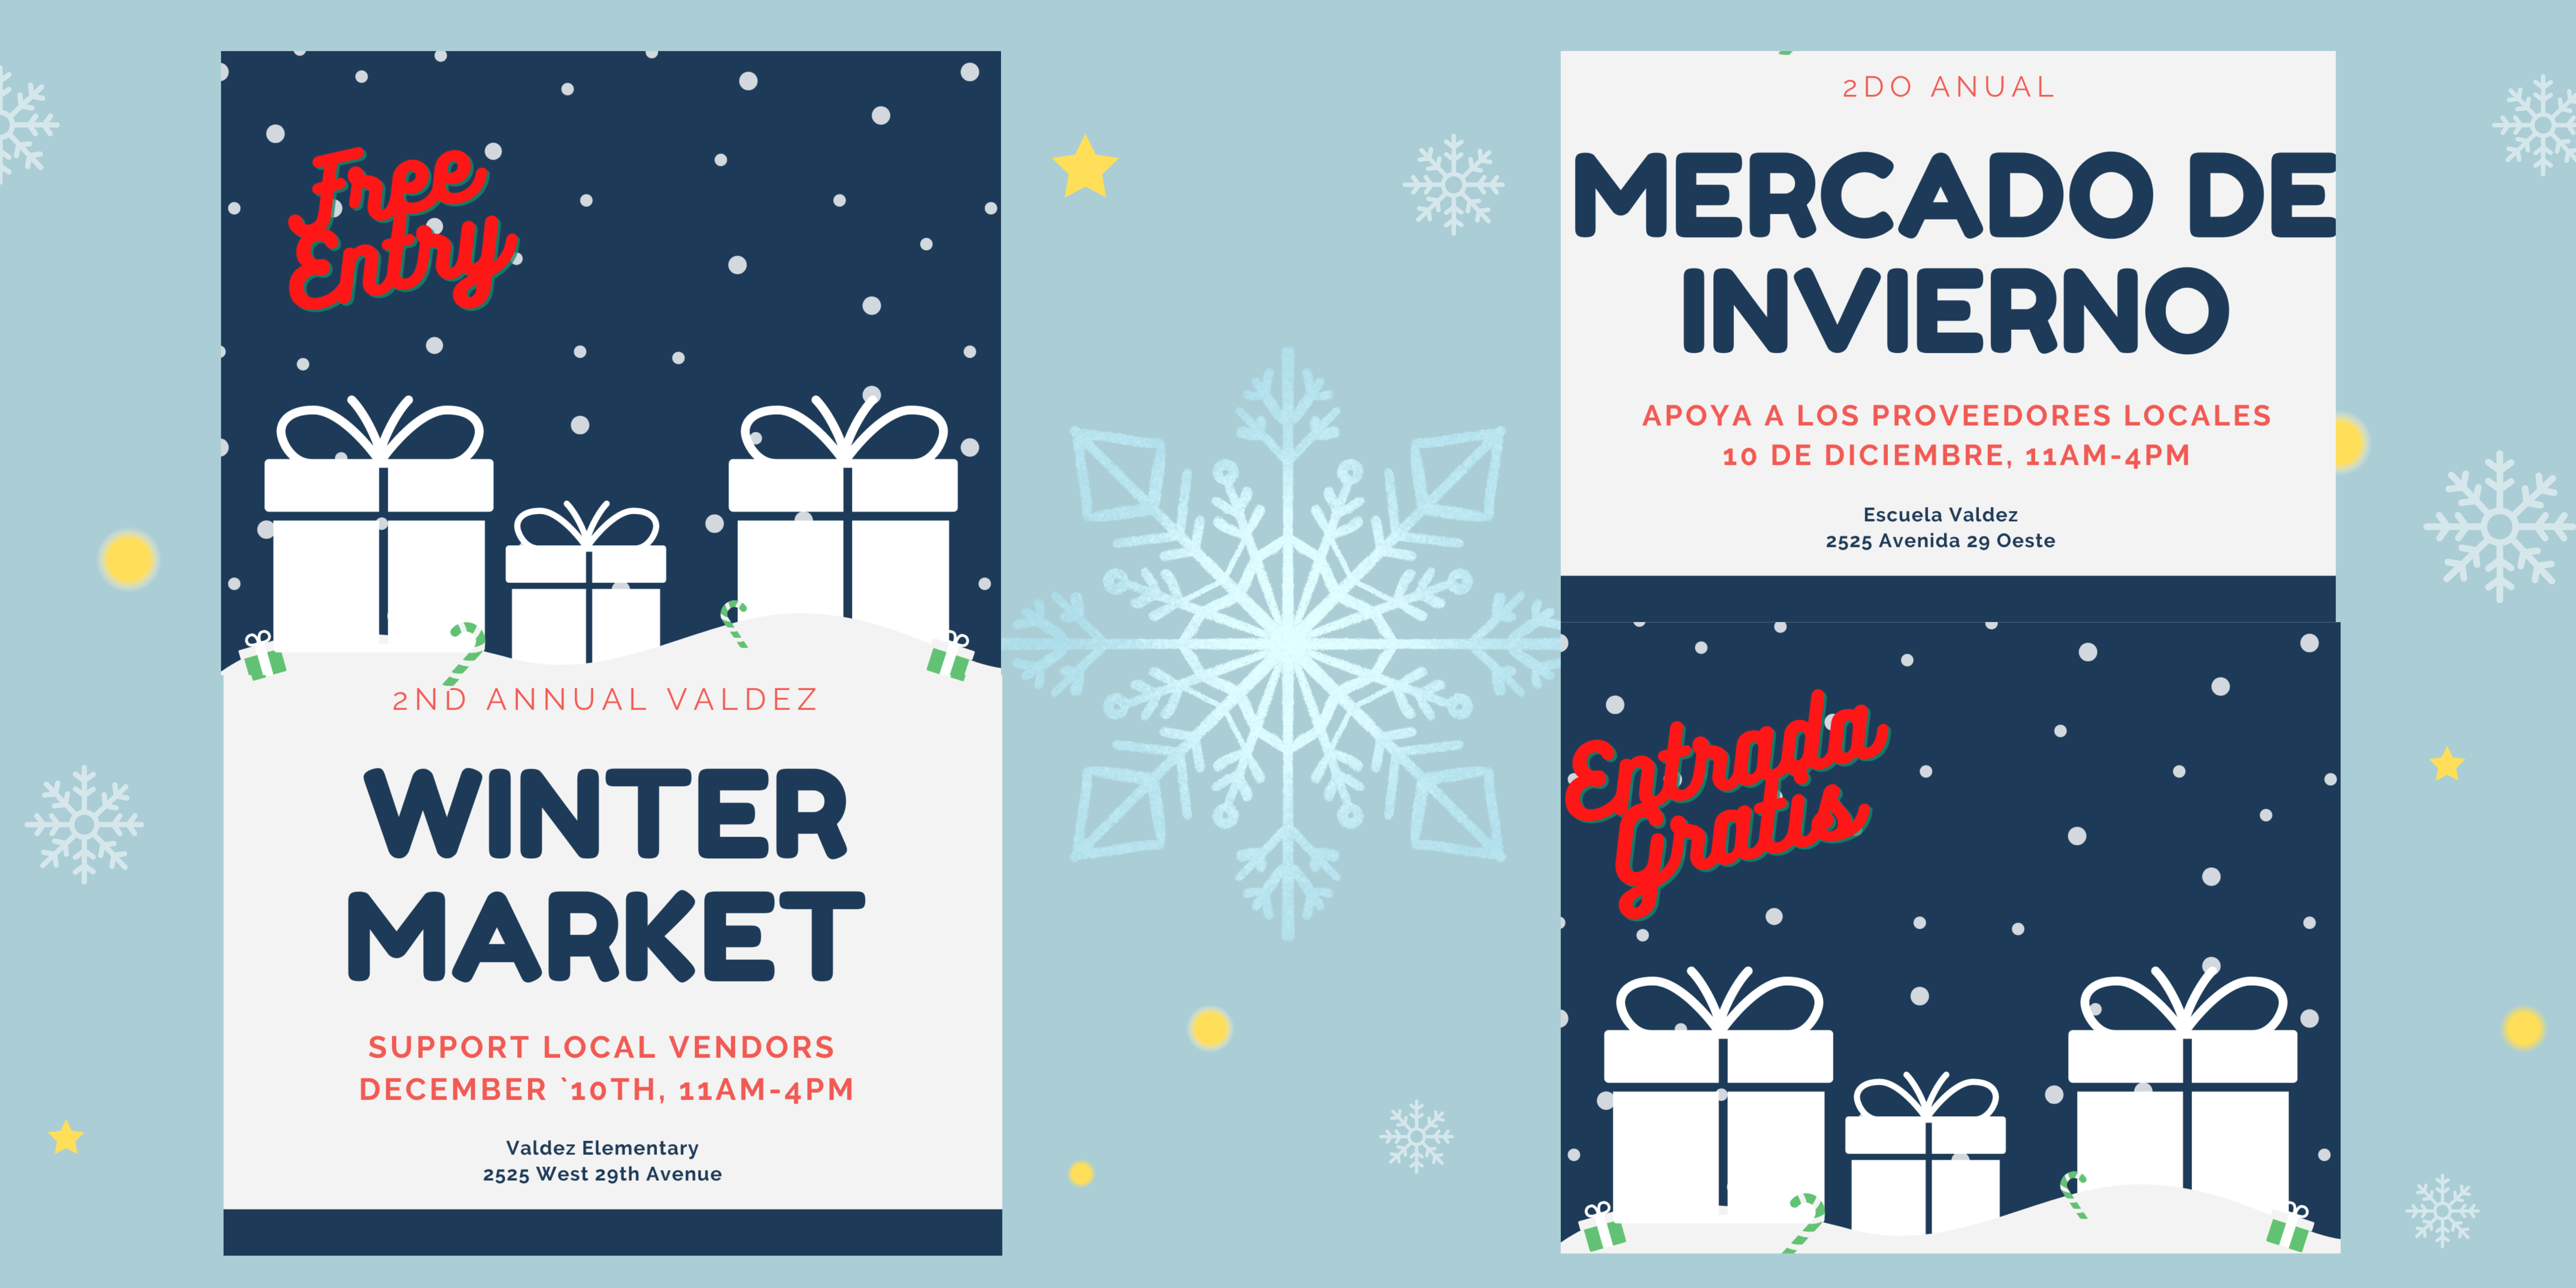 Flyer with white silhouette of wrapped presents against a blue background with snow falling. English side in red text says, "Free Entry" and white text says, "2nd Annual Valdez Winter Market. Support local vendors. December 10th, 11am-4pm. Valdez Elementary, 2525 W. 29th Avenue." Spanish side in red text says:, "Entrada gratis" y el texto blanco dice "Segundo mercado anual de invierno de Valdez. Apoye a los vendedores locales. 10 de diciembre, 11 am a 4 pm. Escuela primaria Valdez, 2525 W. 29th Avenue".